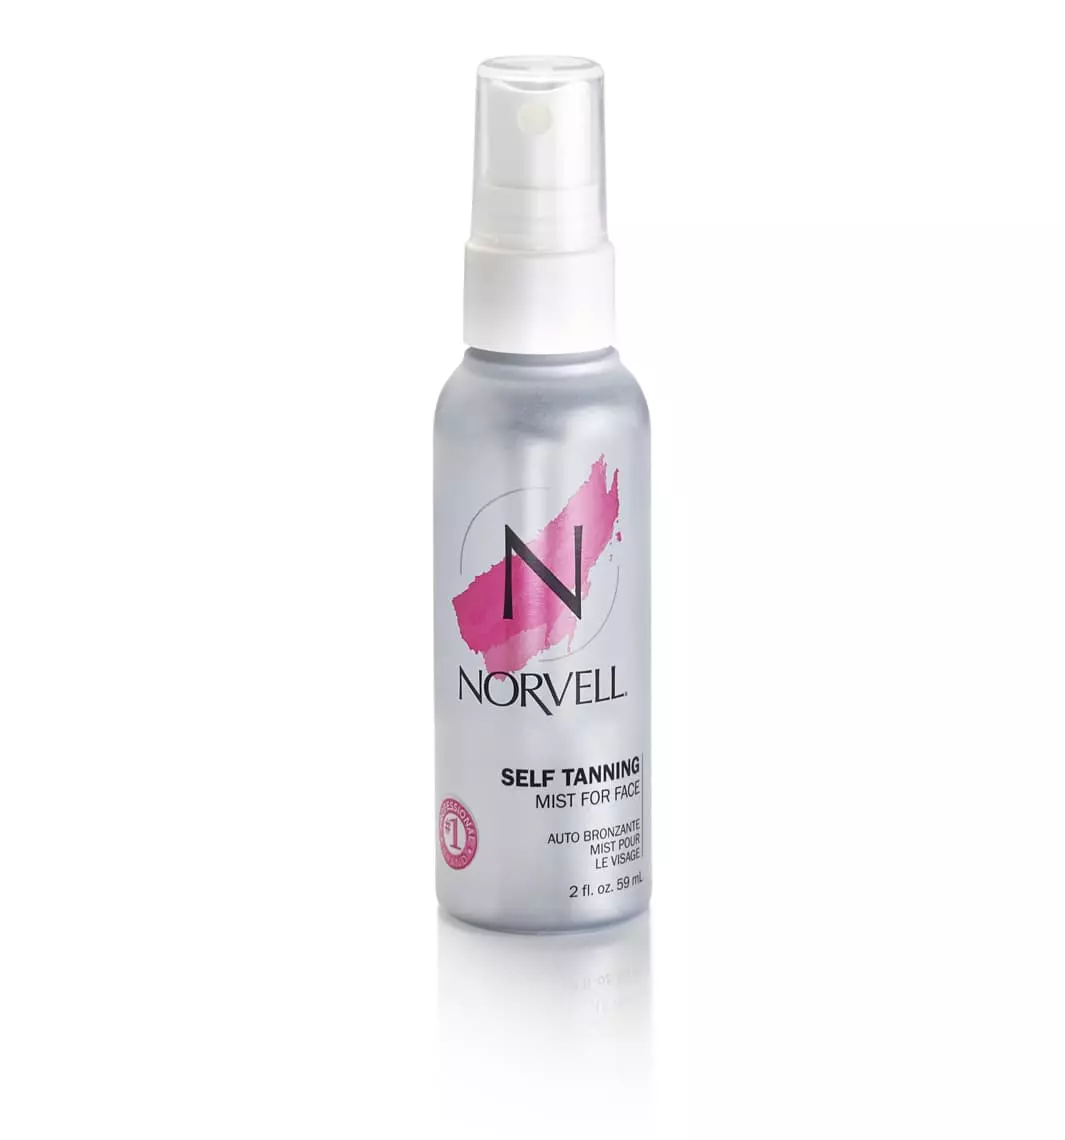 Norvell Self Tanning Mist For Face